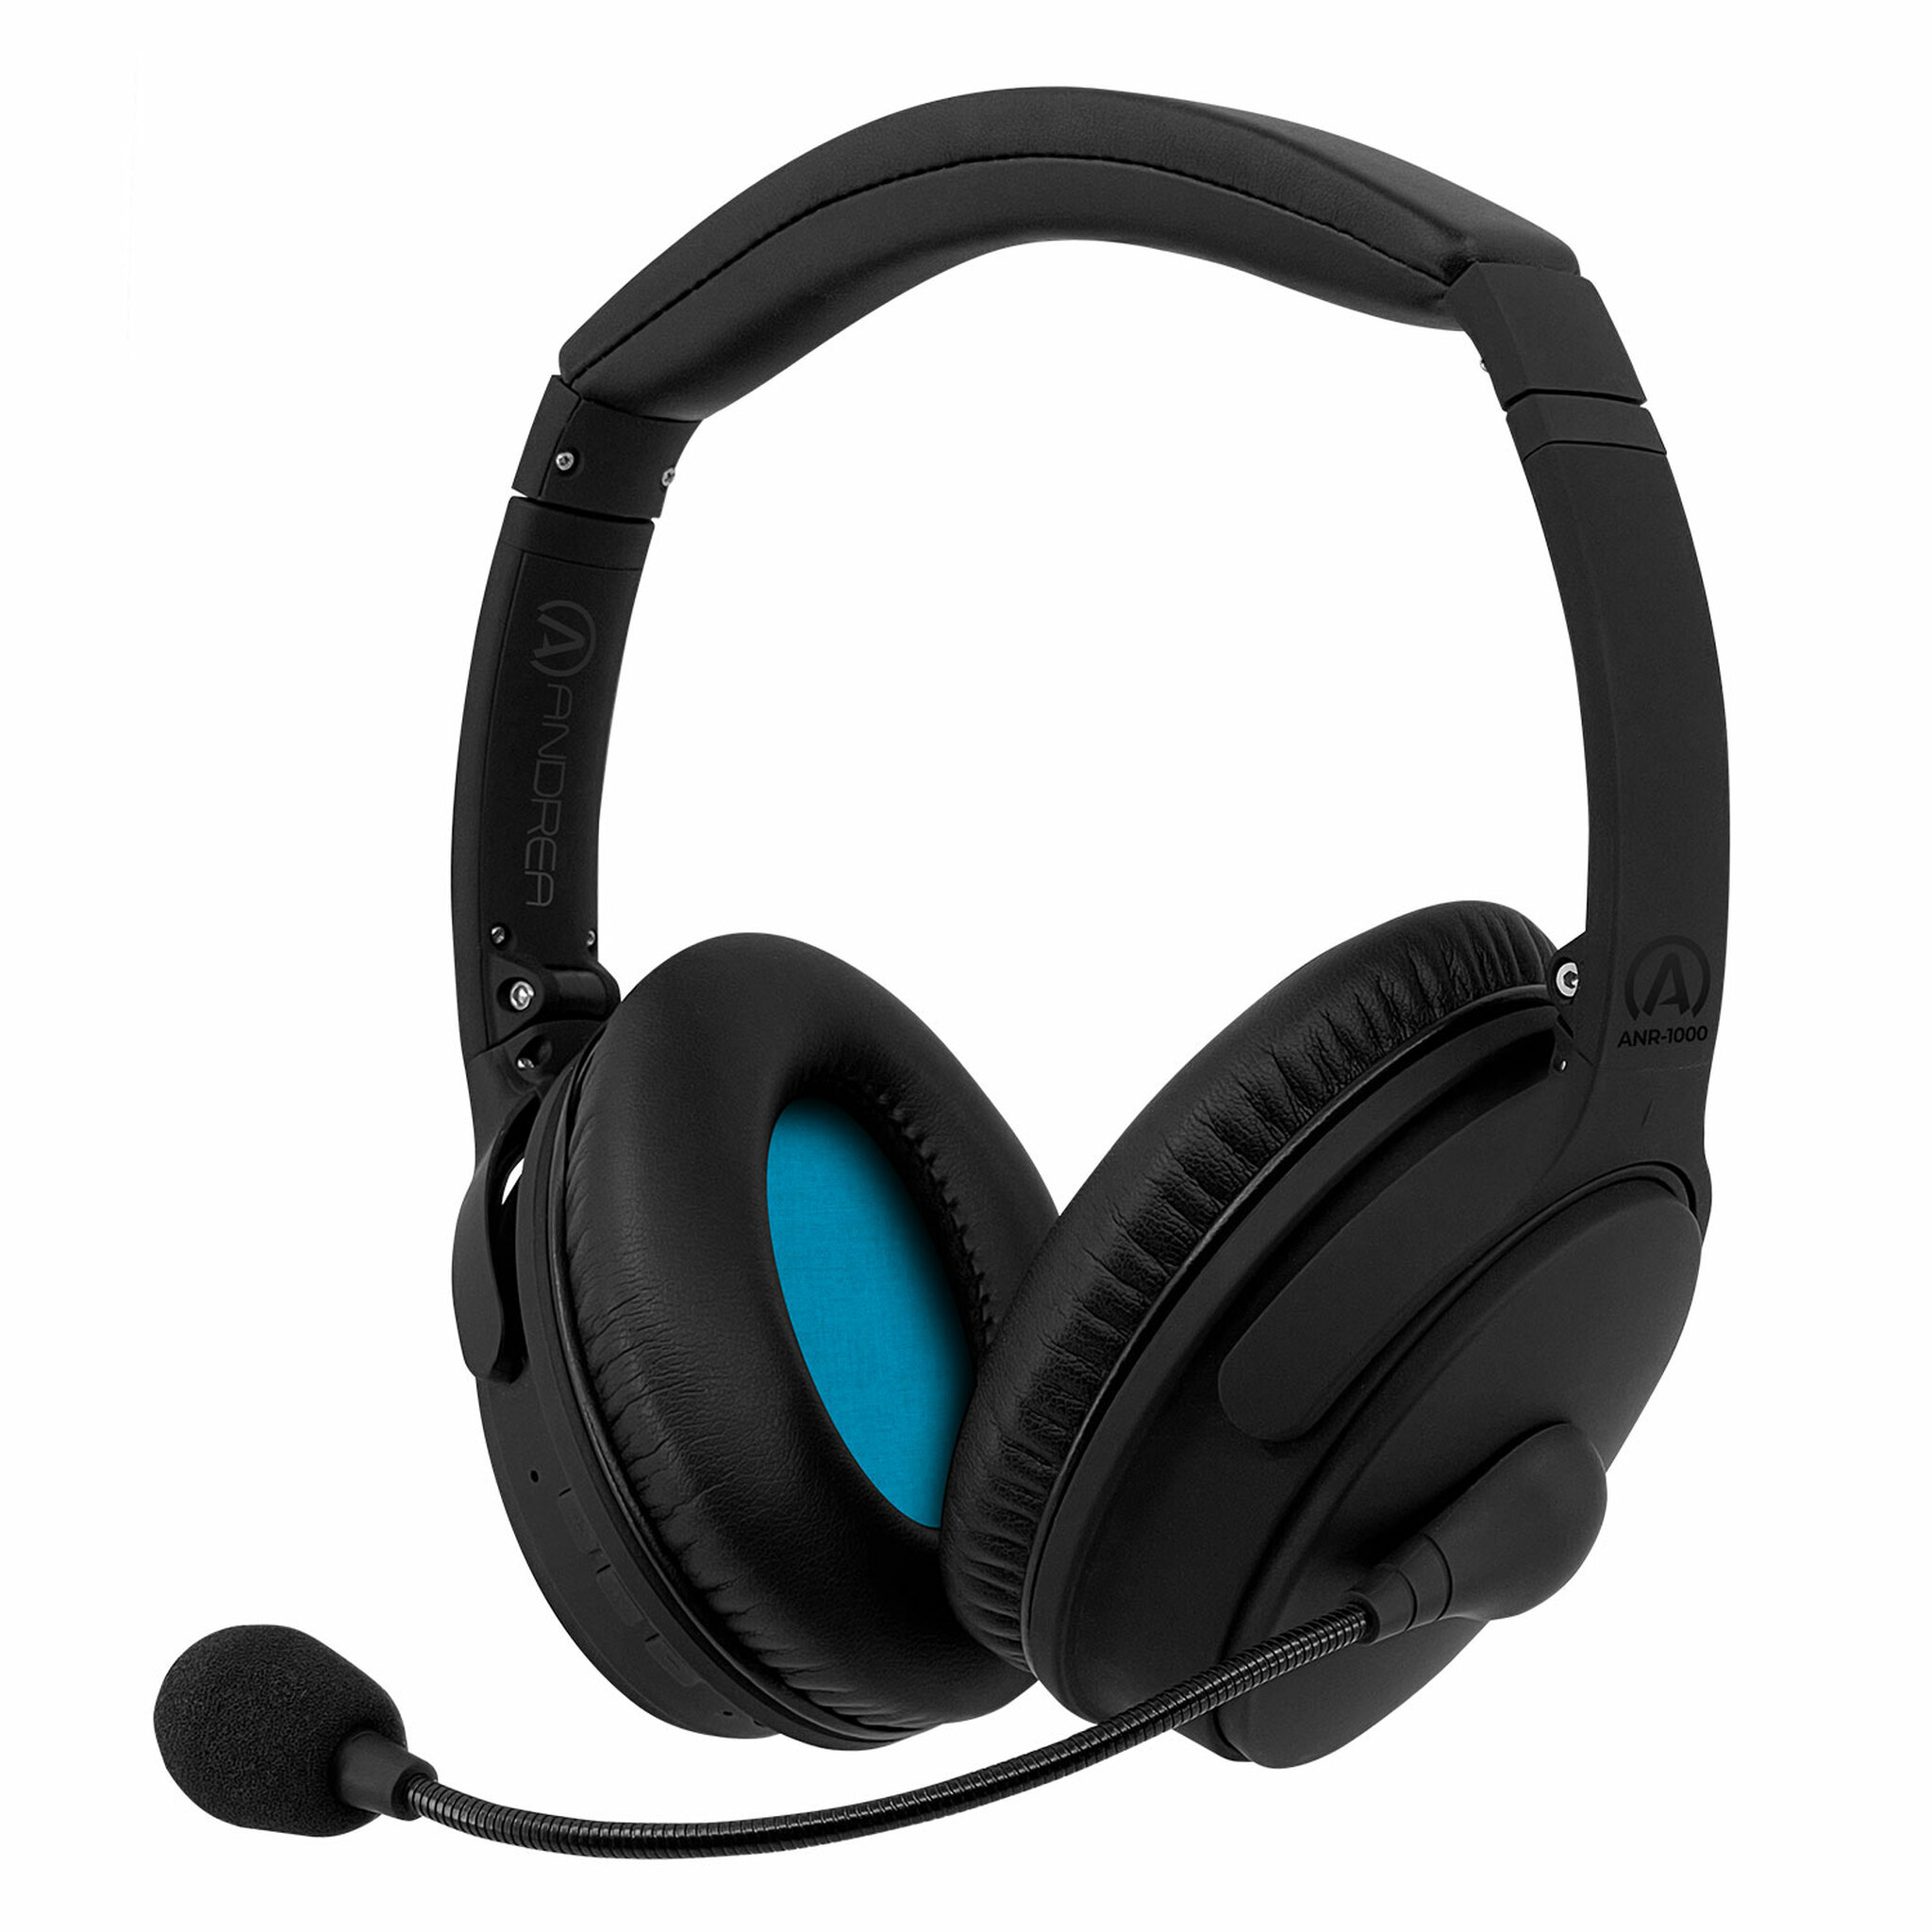 HALF-PRICE! Only $49.98 with coupon! Andrea wired/wireless noise-canceling wired (or Bluetooth wireless) headset Questions & Answers